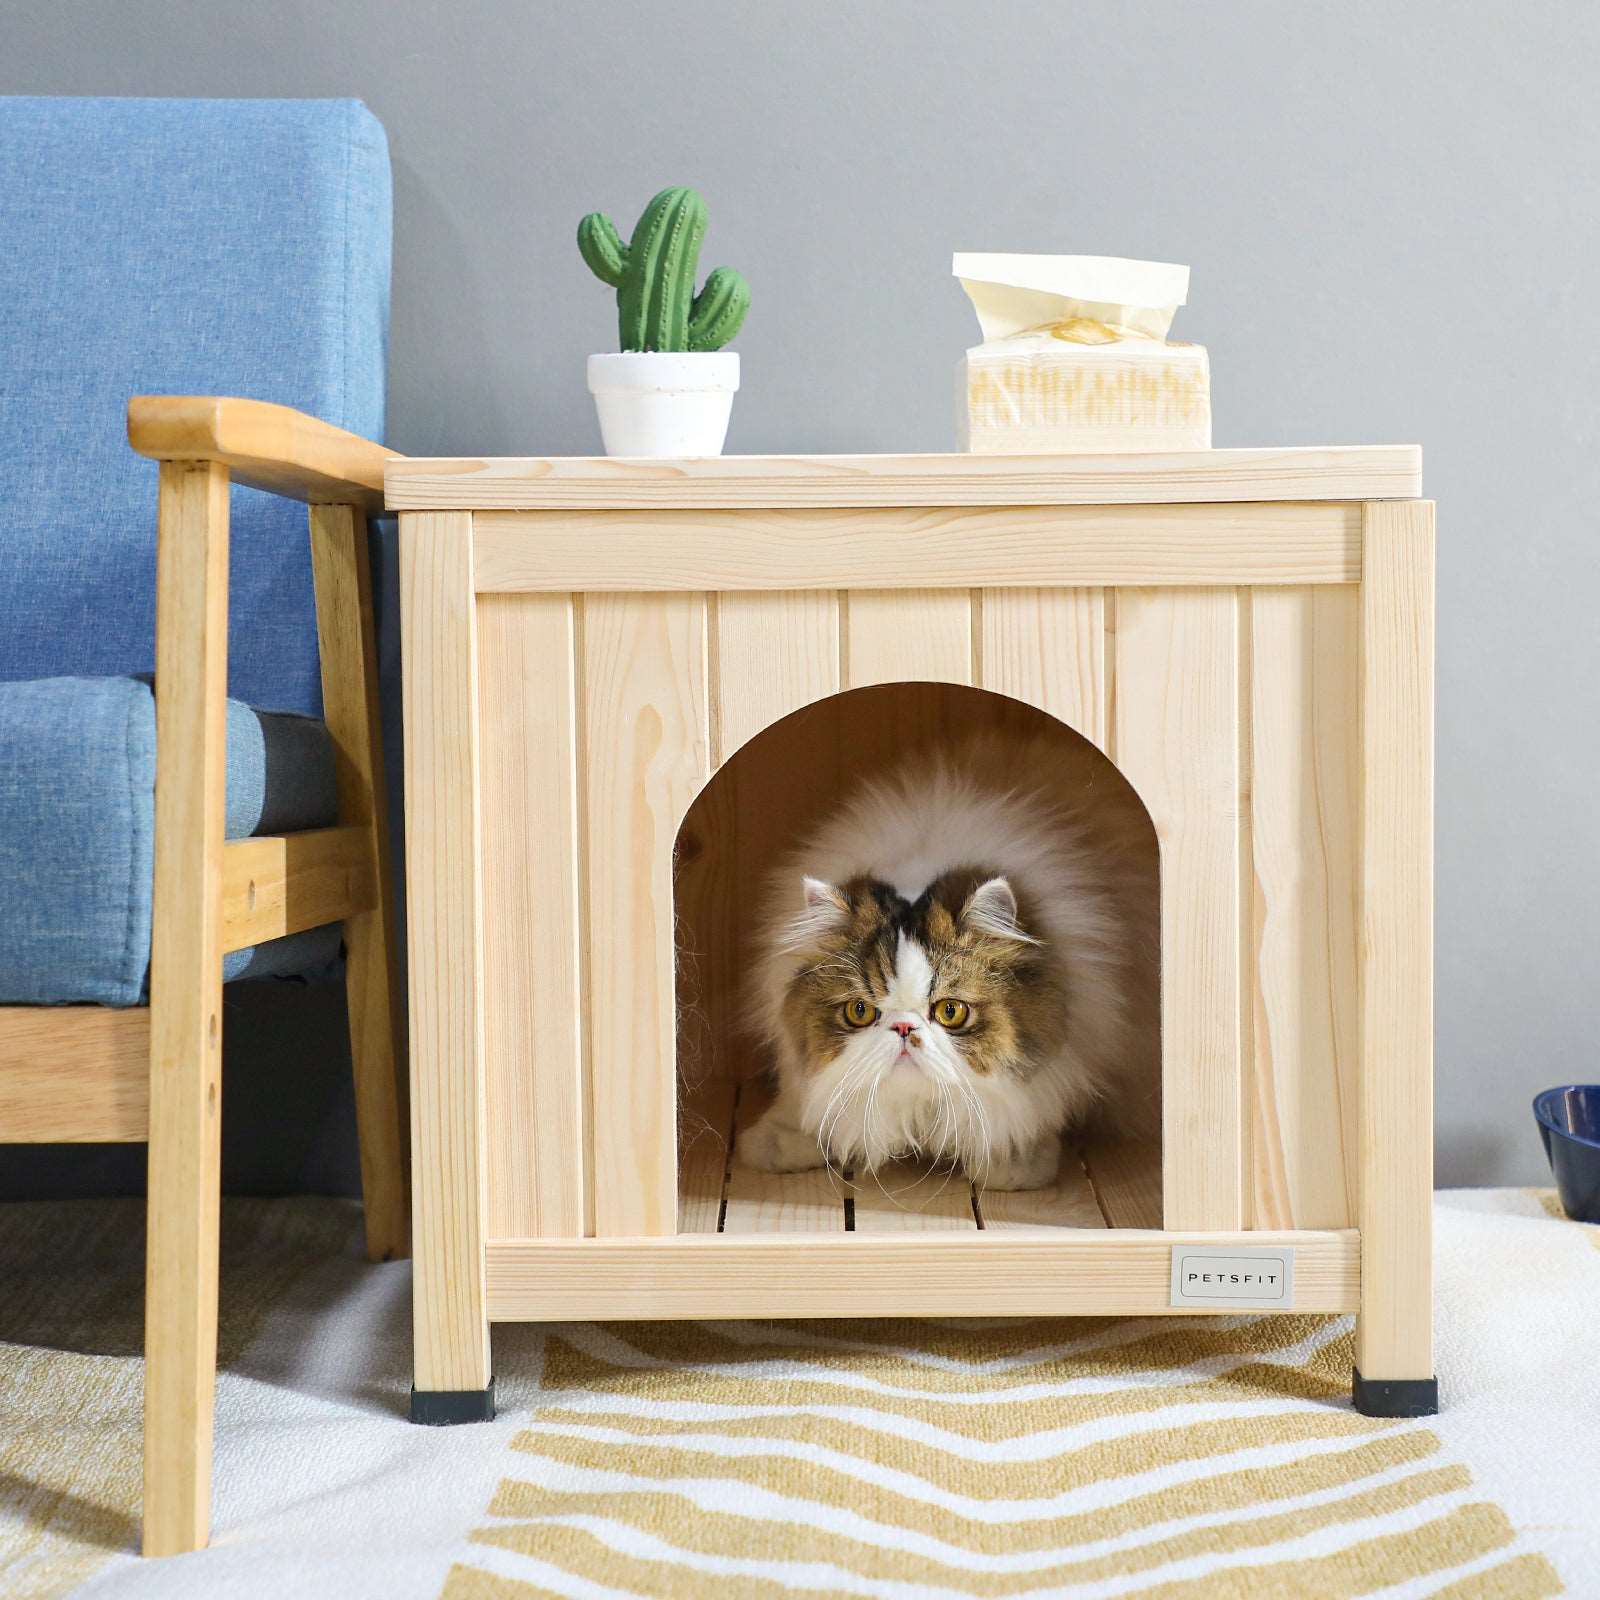 Petsfit-Indoor-Dog-House-Wood-with-Elevated-and-Ventilate-Floor-08